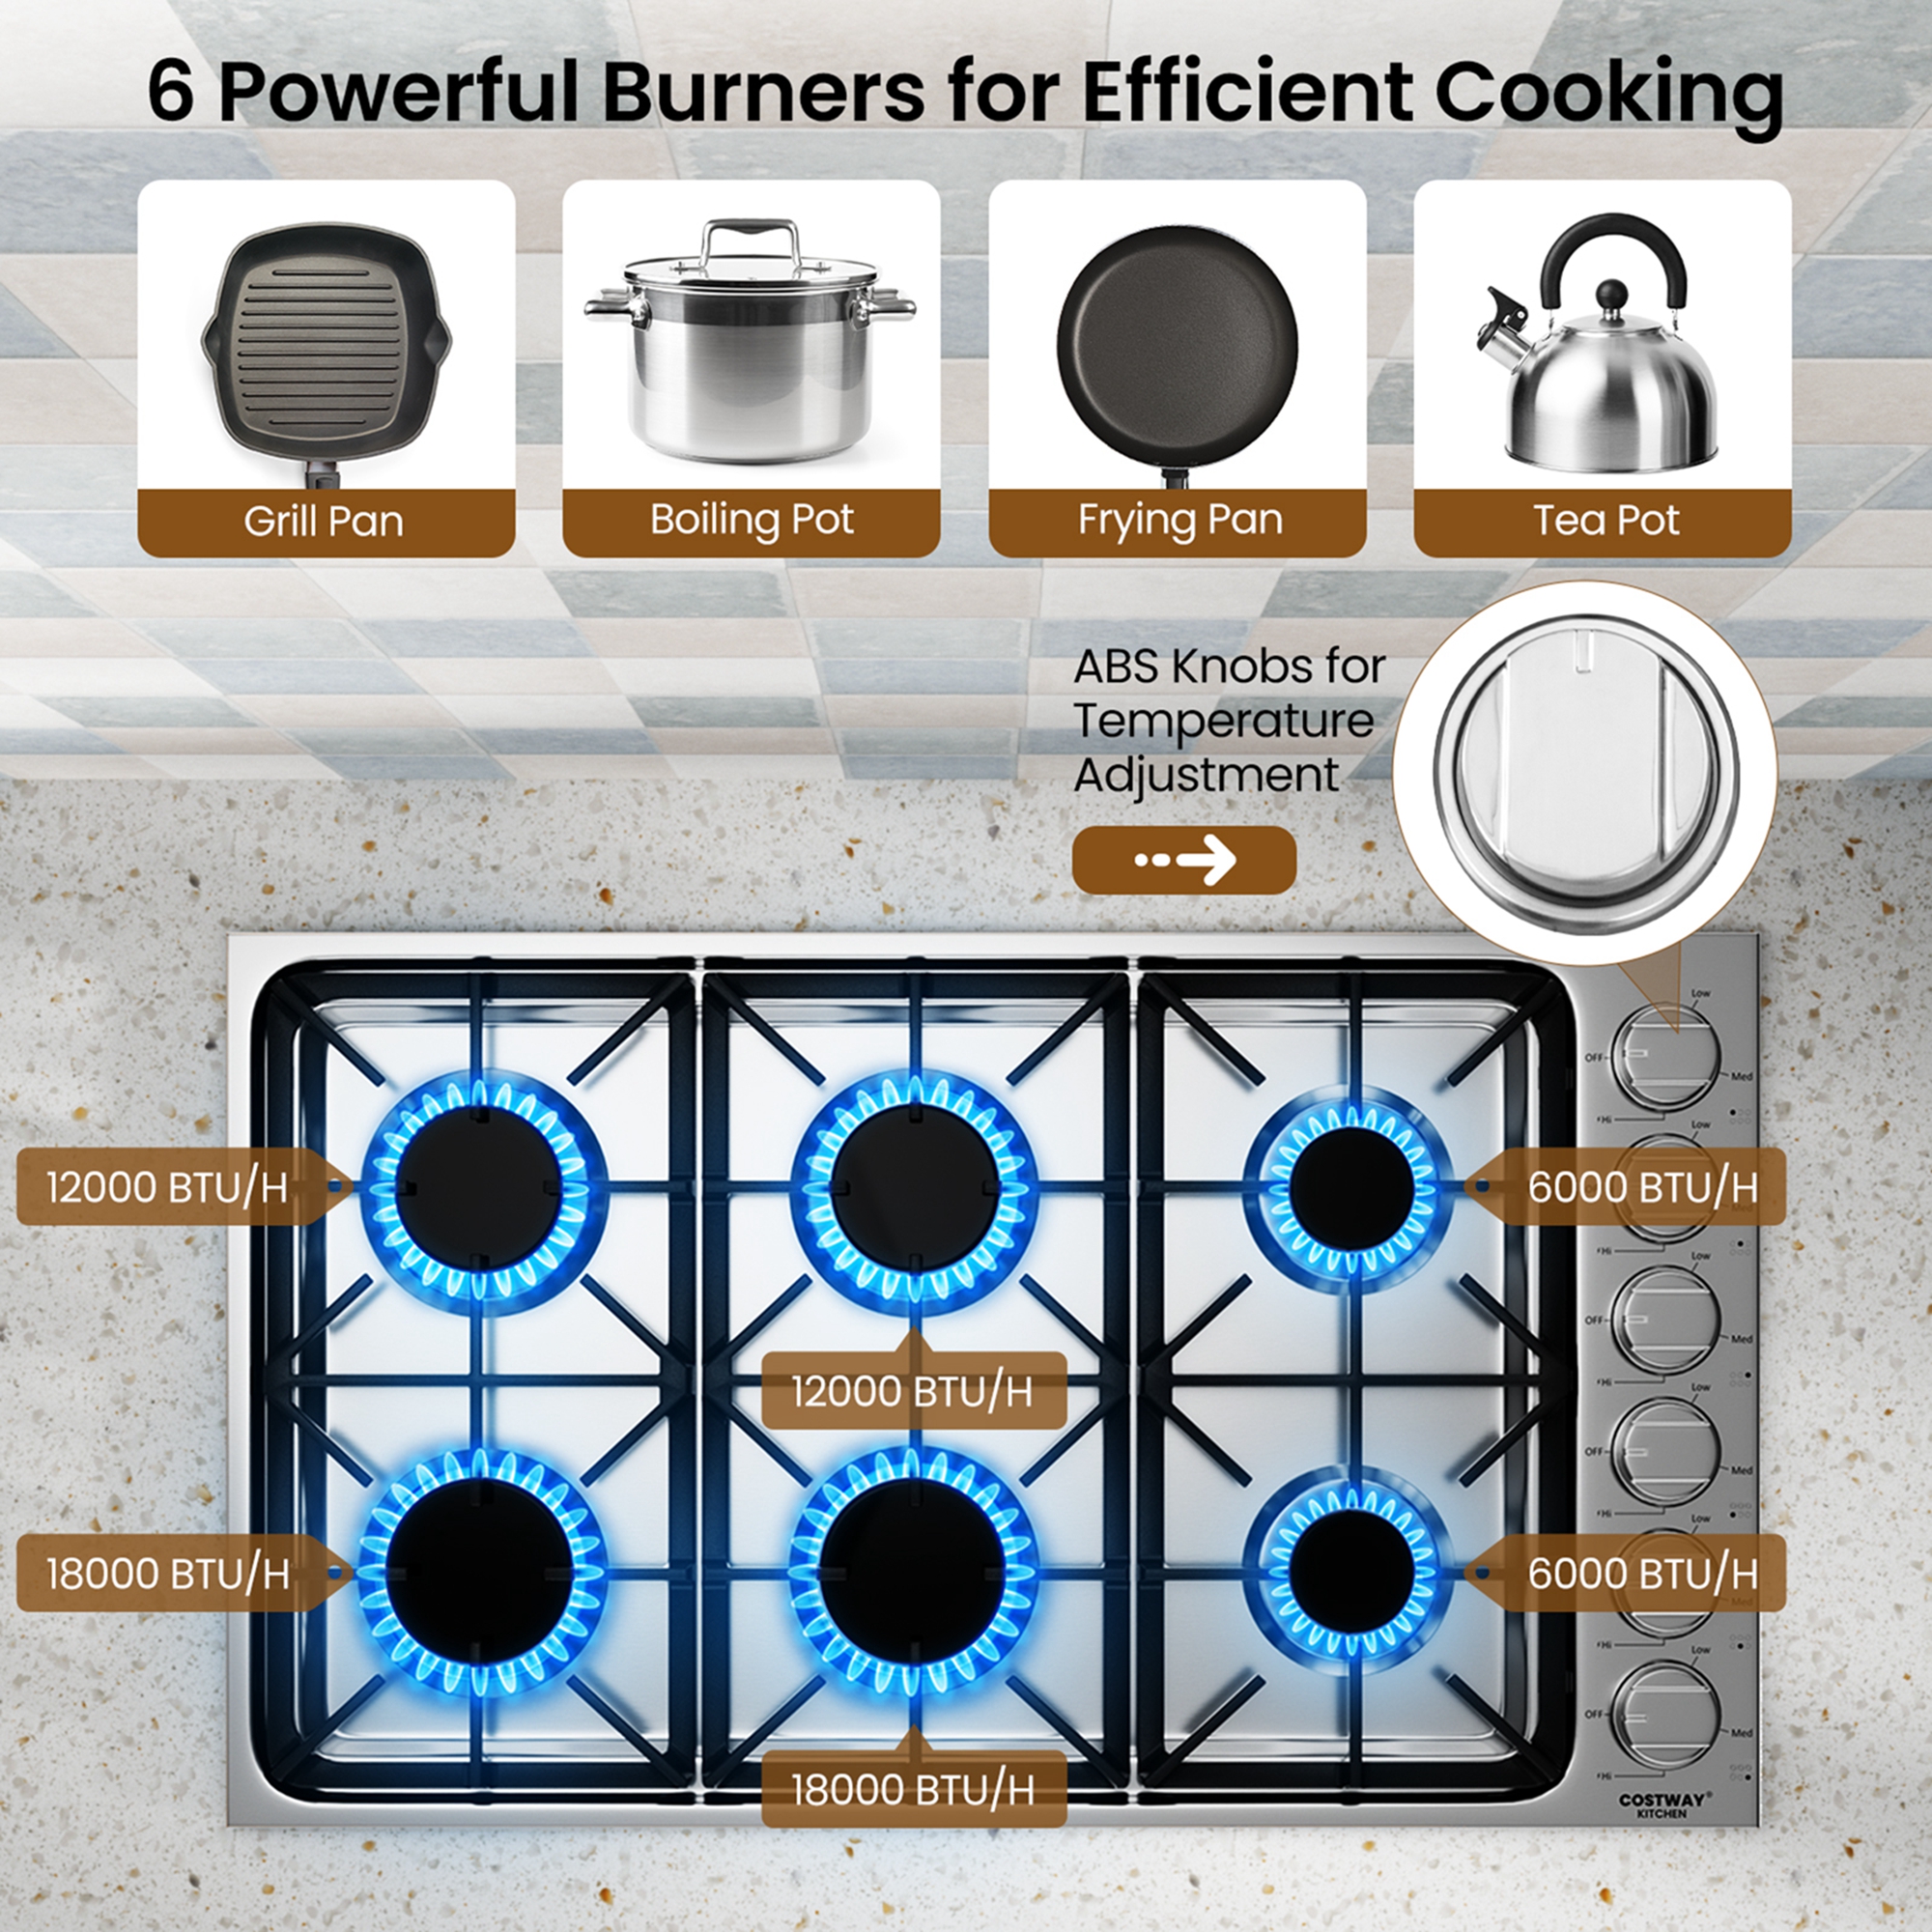 Costway 36 Inches Gas Cooktop Stainless Steel Built-in Stovetop with 6 Sealed Burners